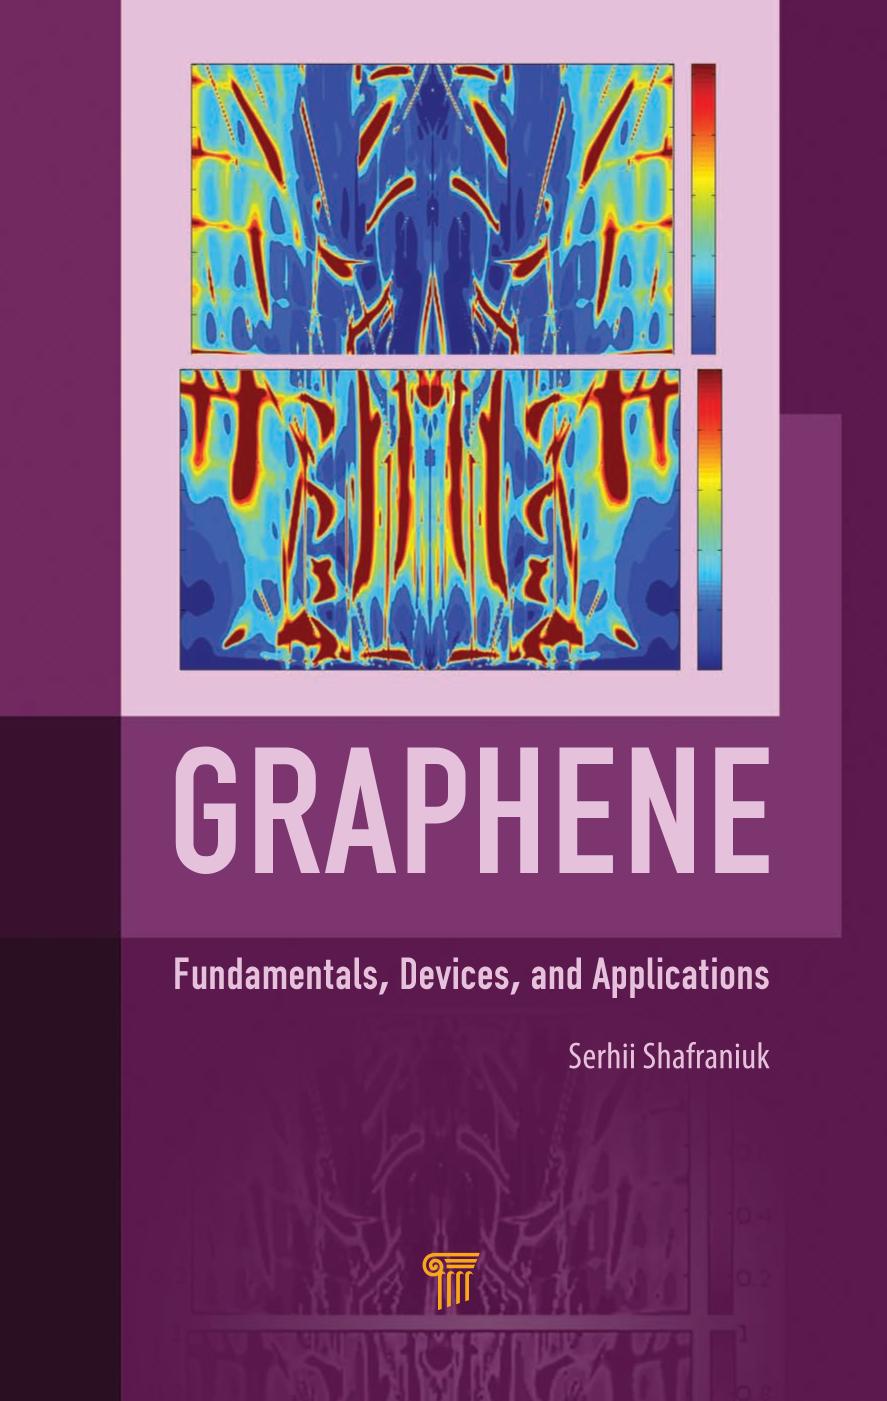 Graphene: Fundamentals, Devices, and Applications